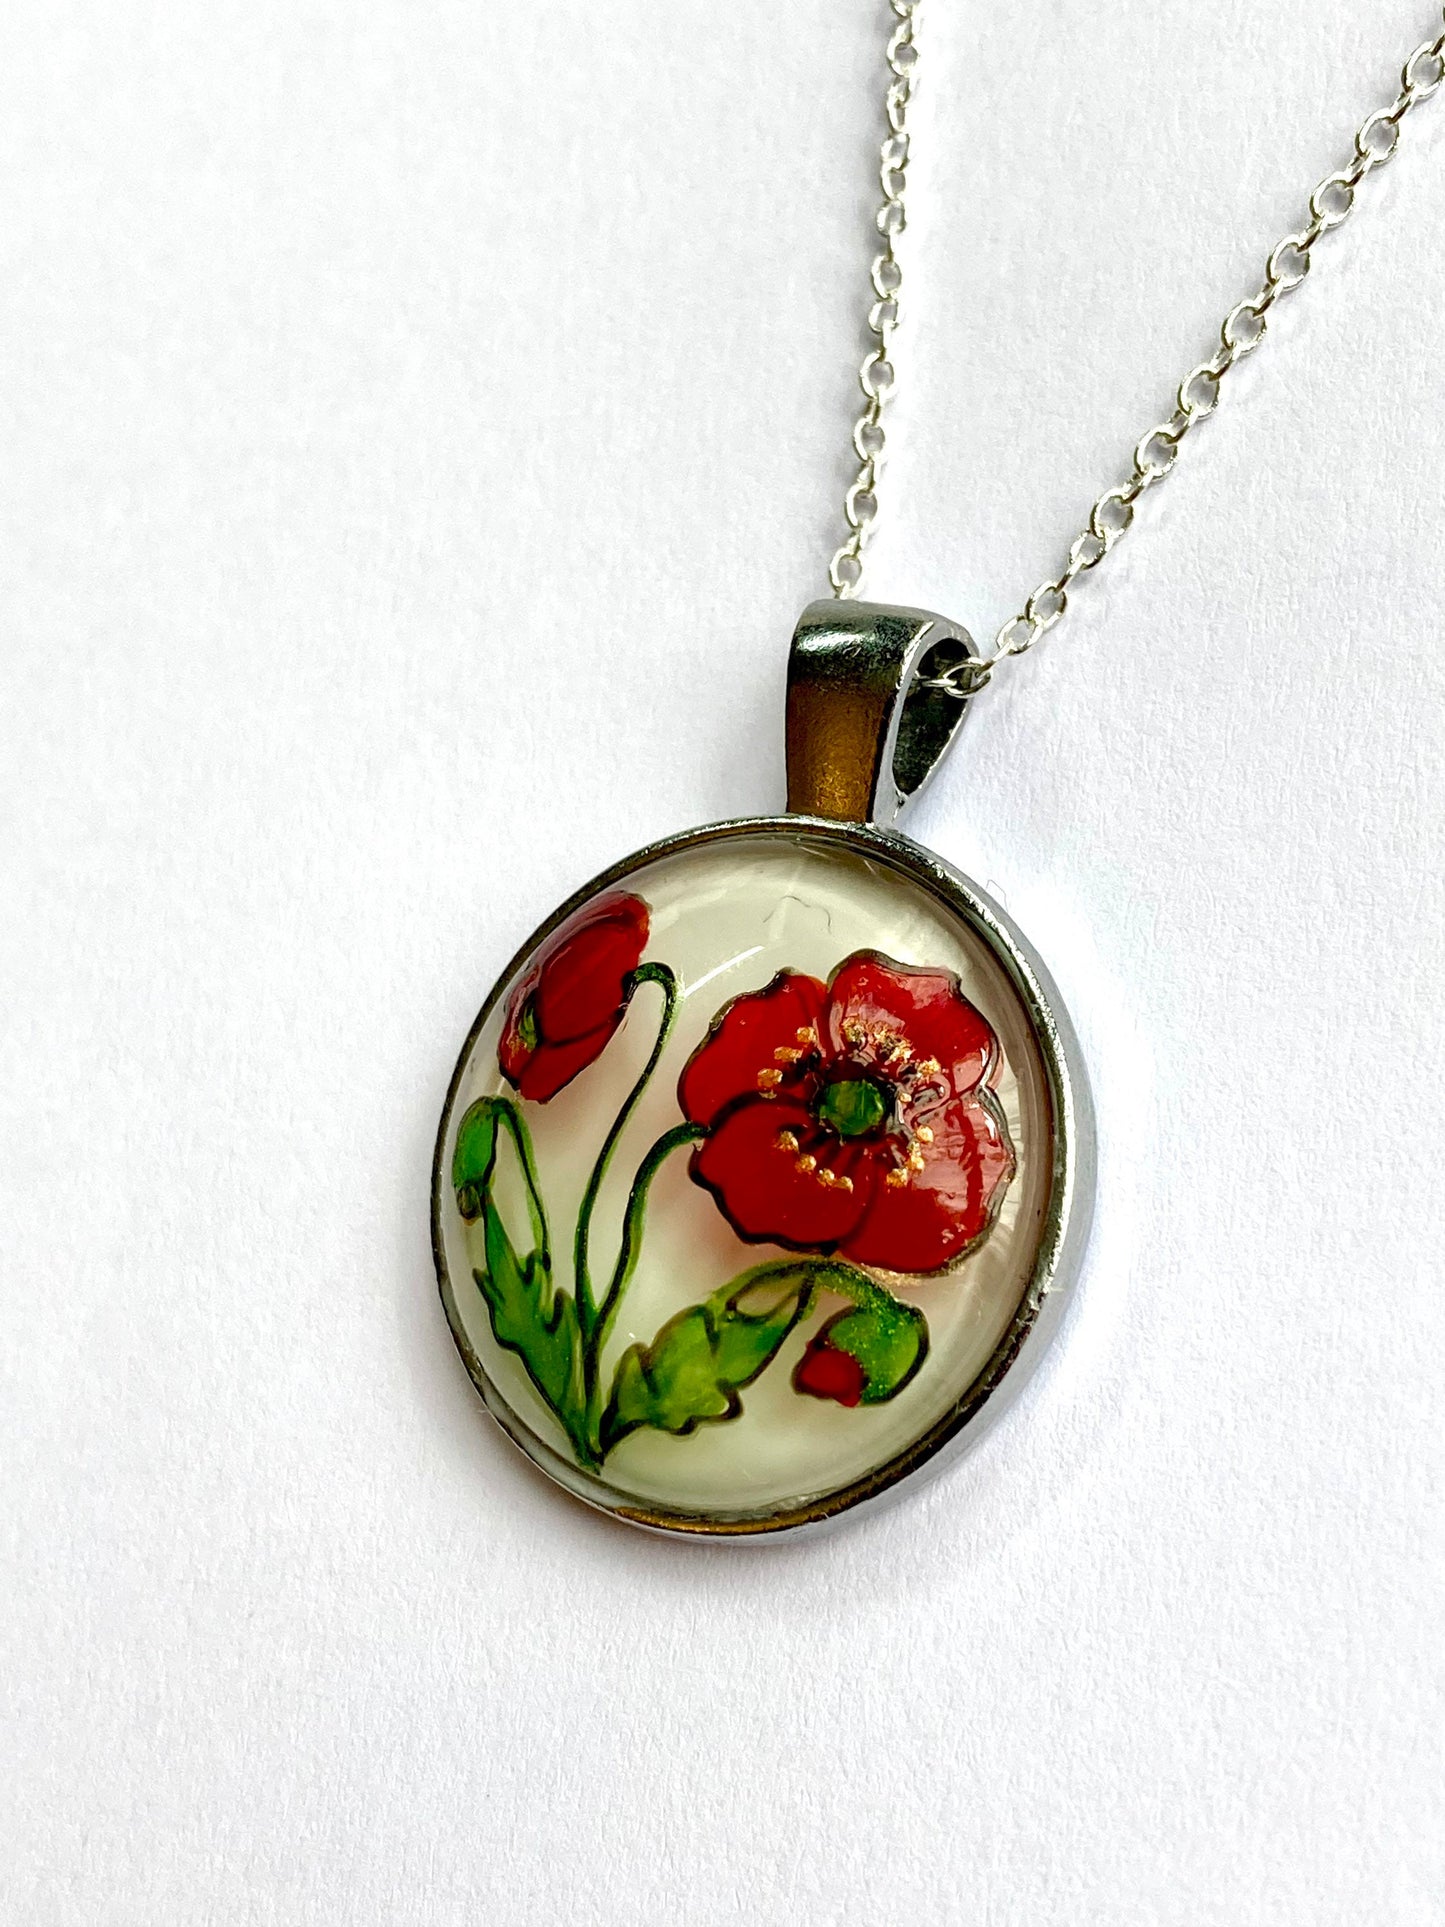 Poppy hand painted glass pendant necklace